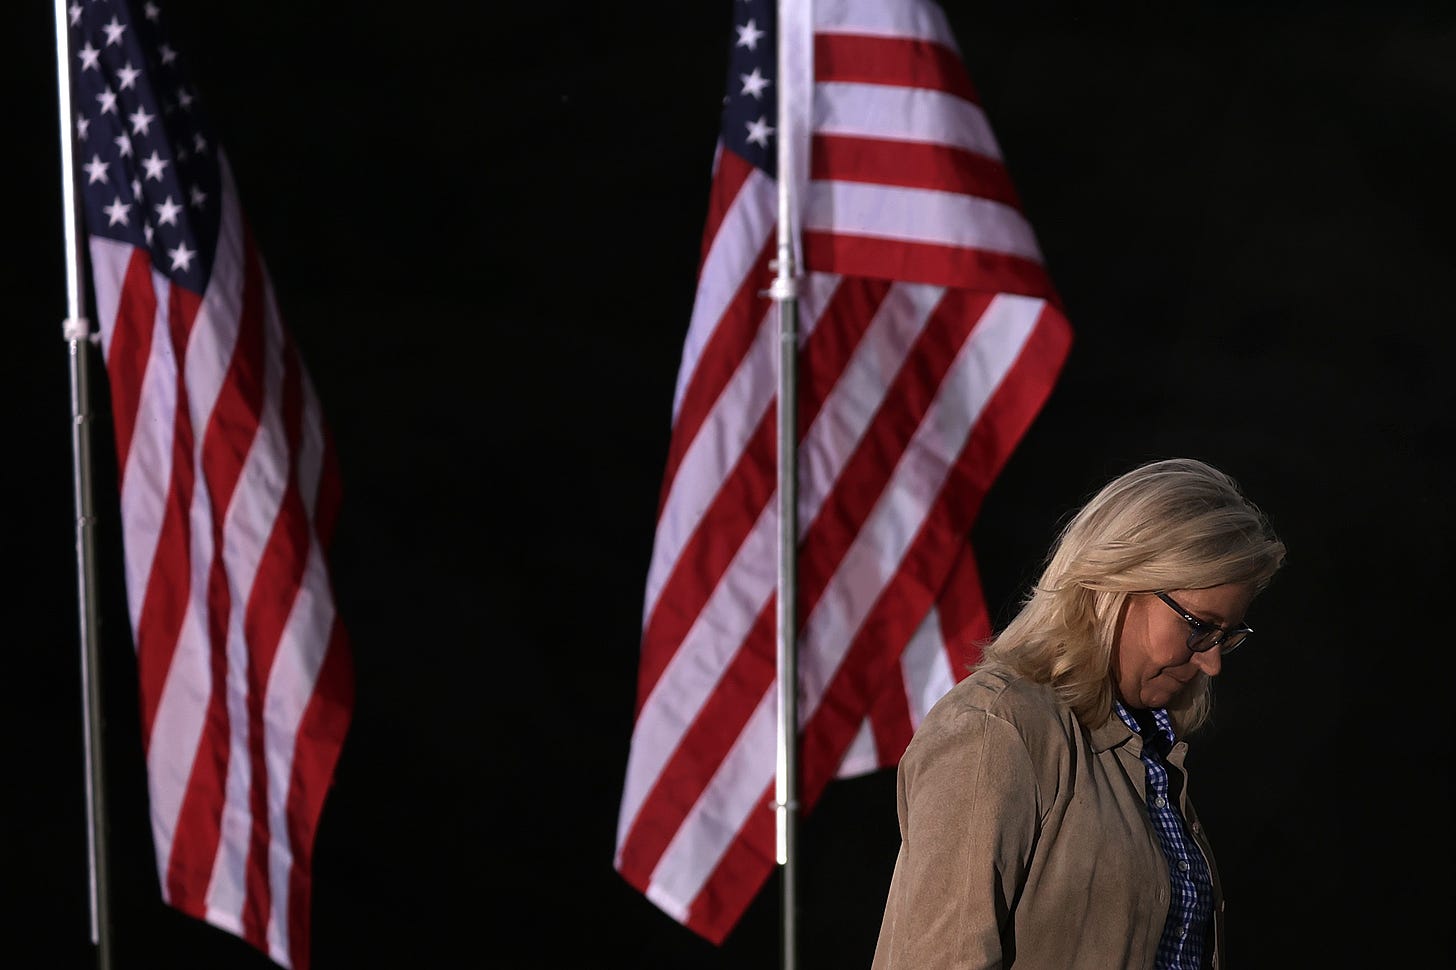 Rep. Liz Cheney departs after speaking to supporters during a primary night event.